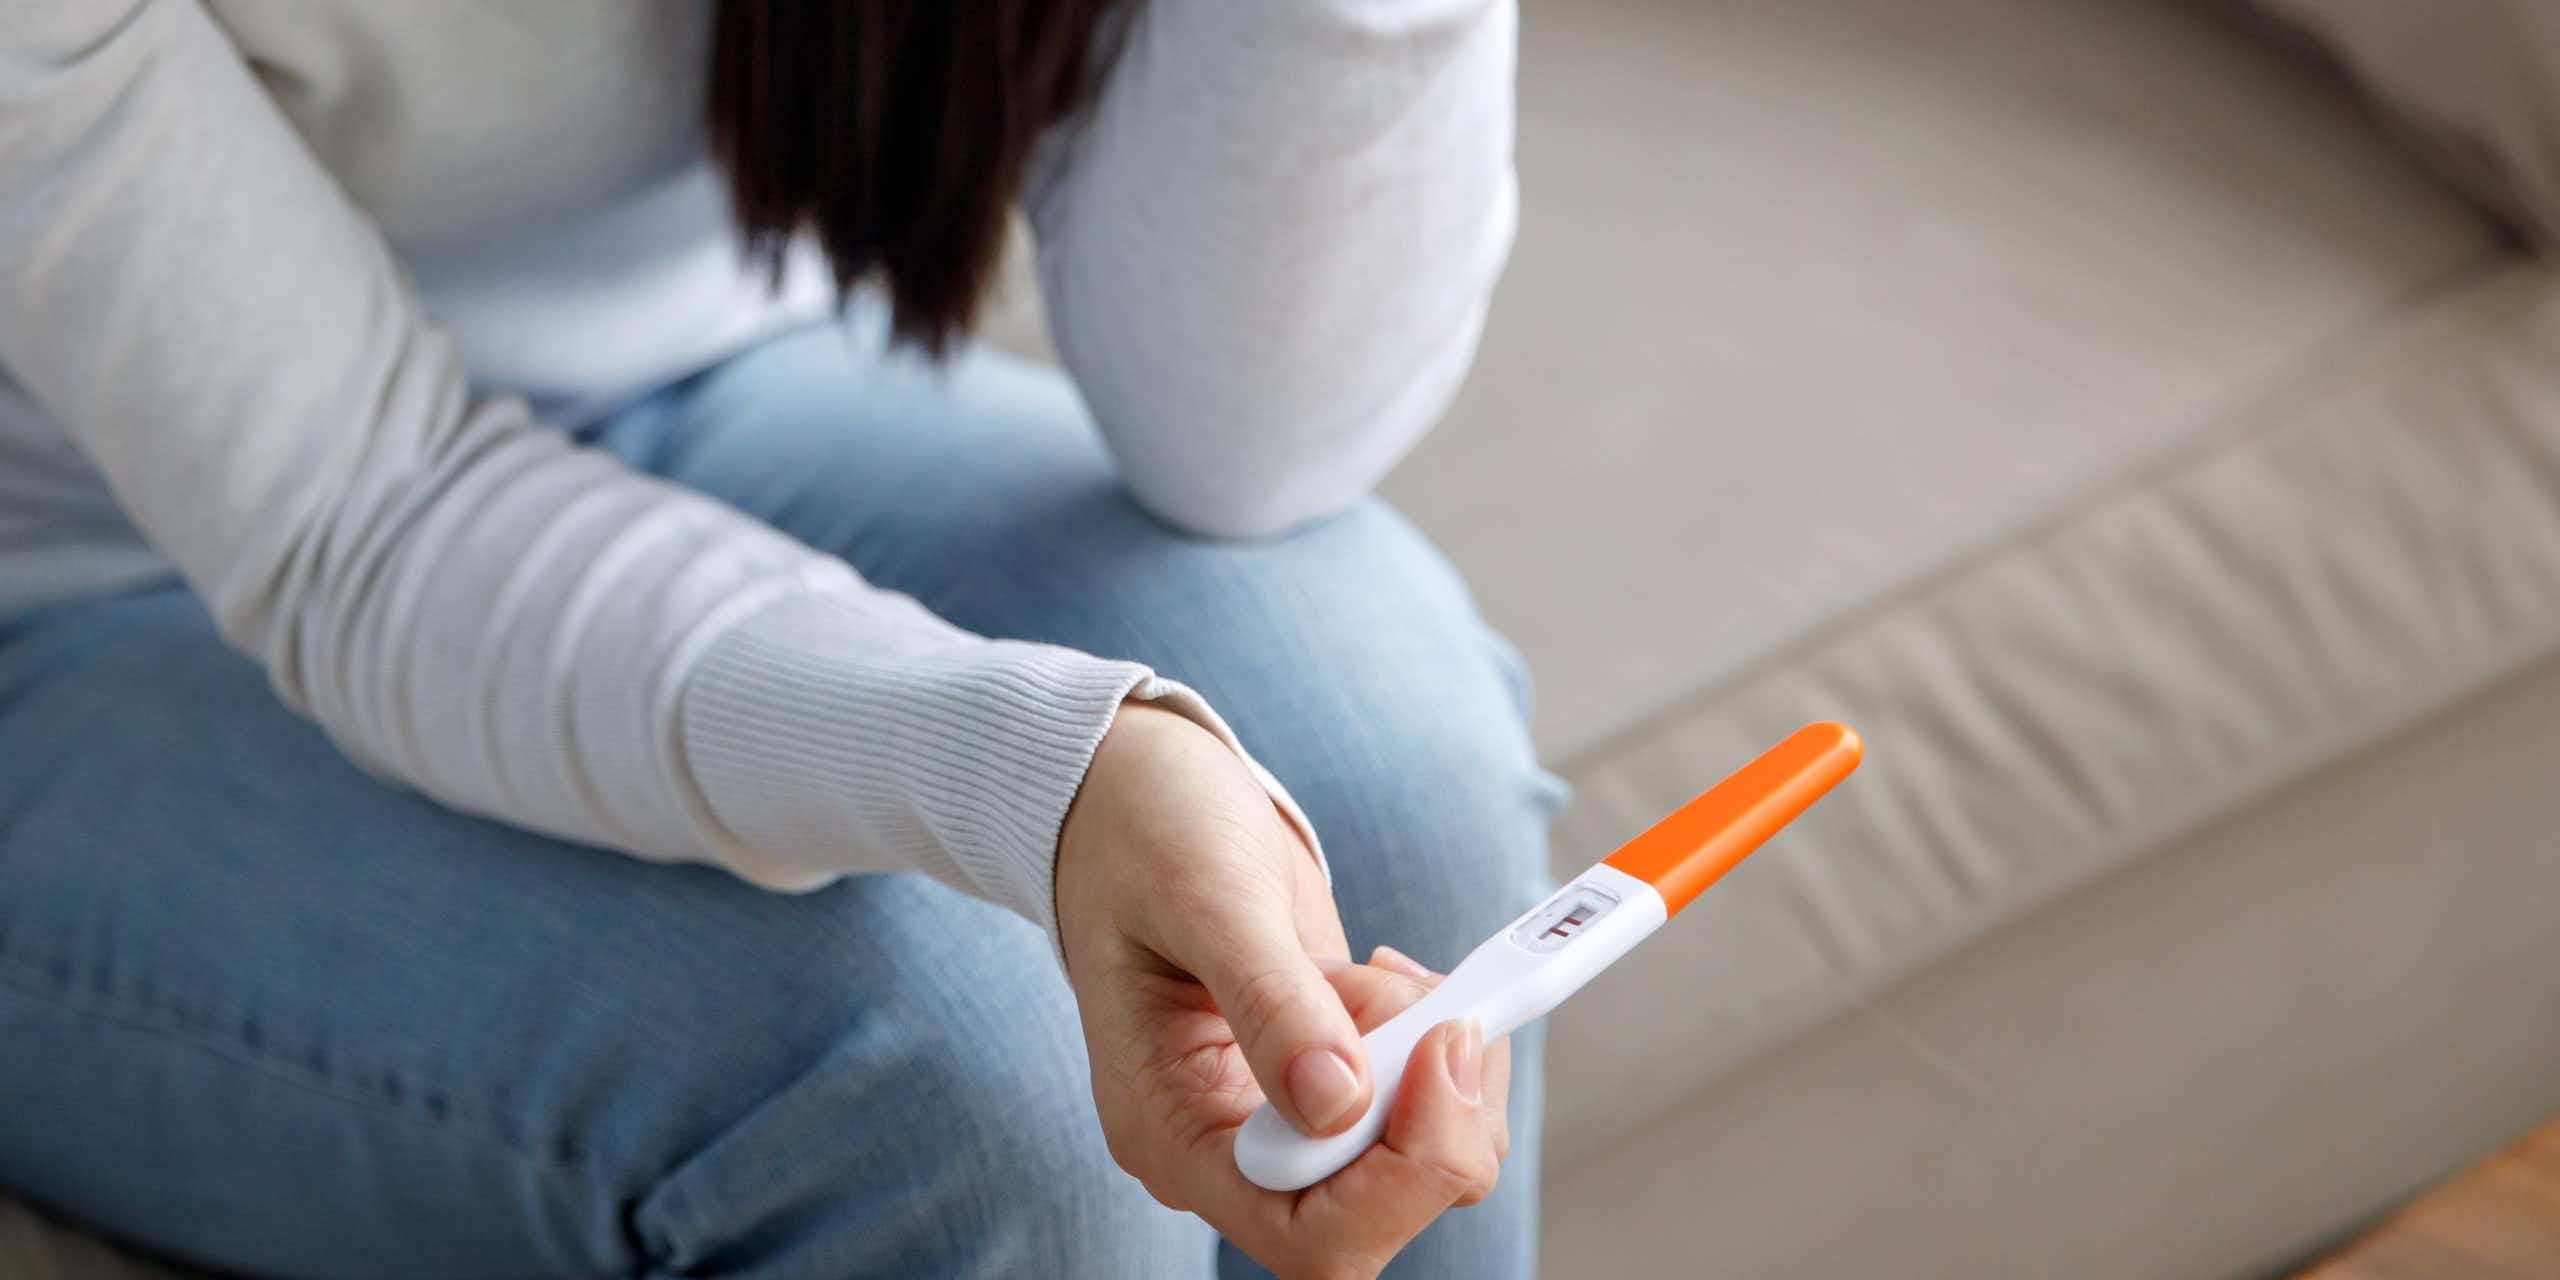 A woman sitting on a couch holding a pregnancy test, her face isn't visible but her body language suggests she is not happy